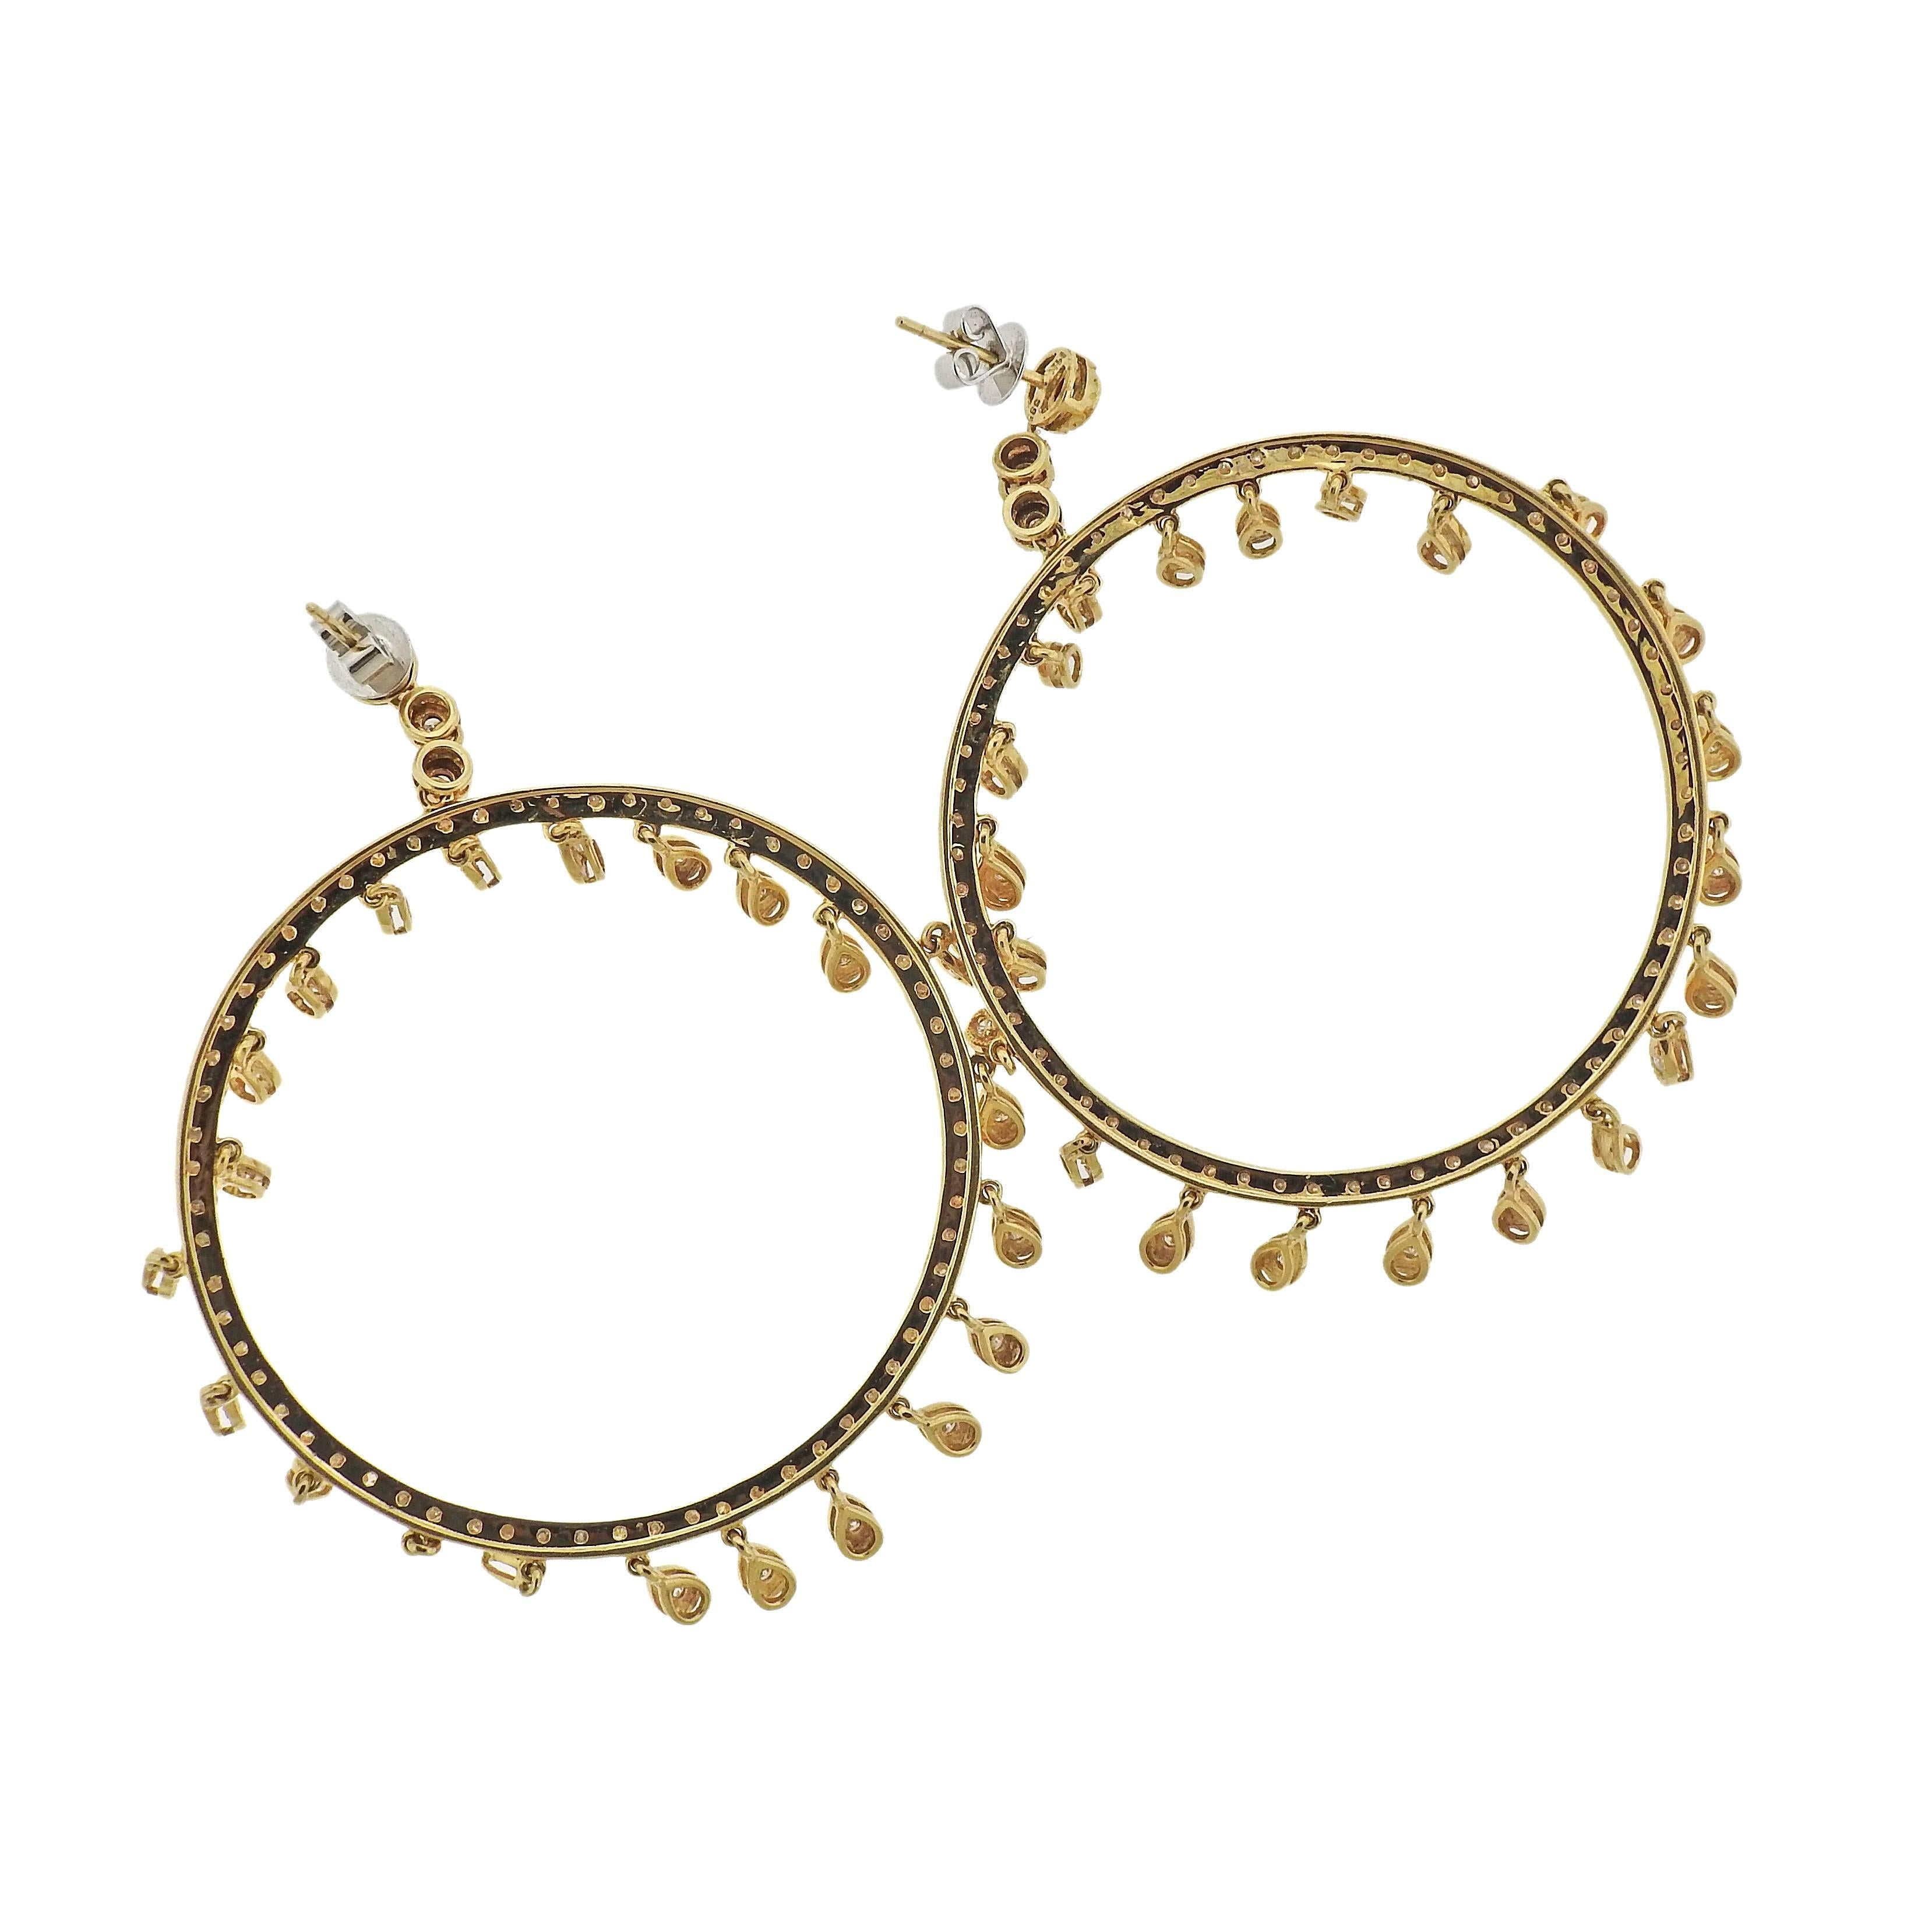 Pair of large circle drop earrings, crafted in 14k yellow gold, decorated with approximately 1.85ctw in diamonds.  Earrings are 69mm long, circles are 48mm in diameter. Marked: 585 14k. Weight - 17.8 grams.